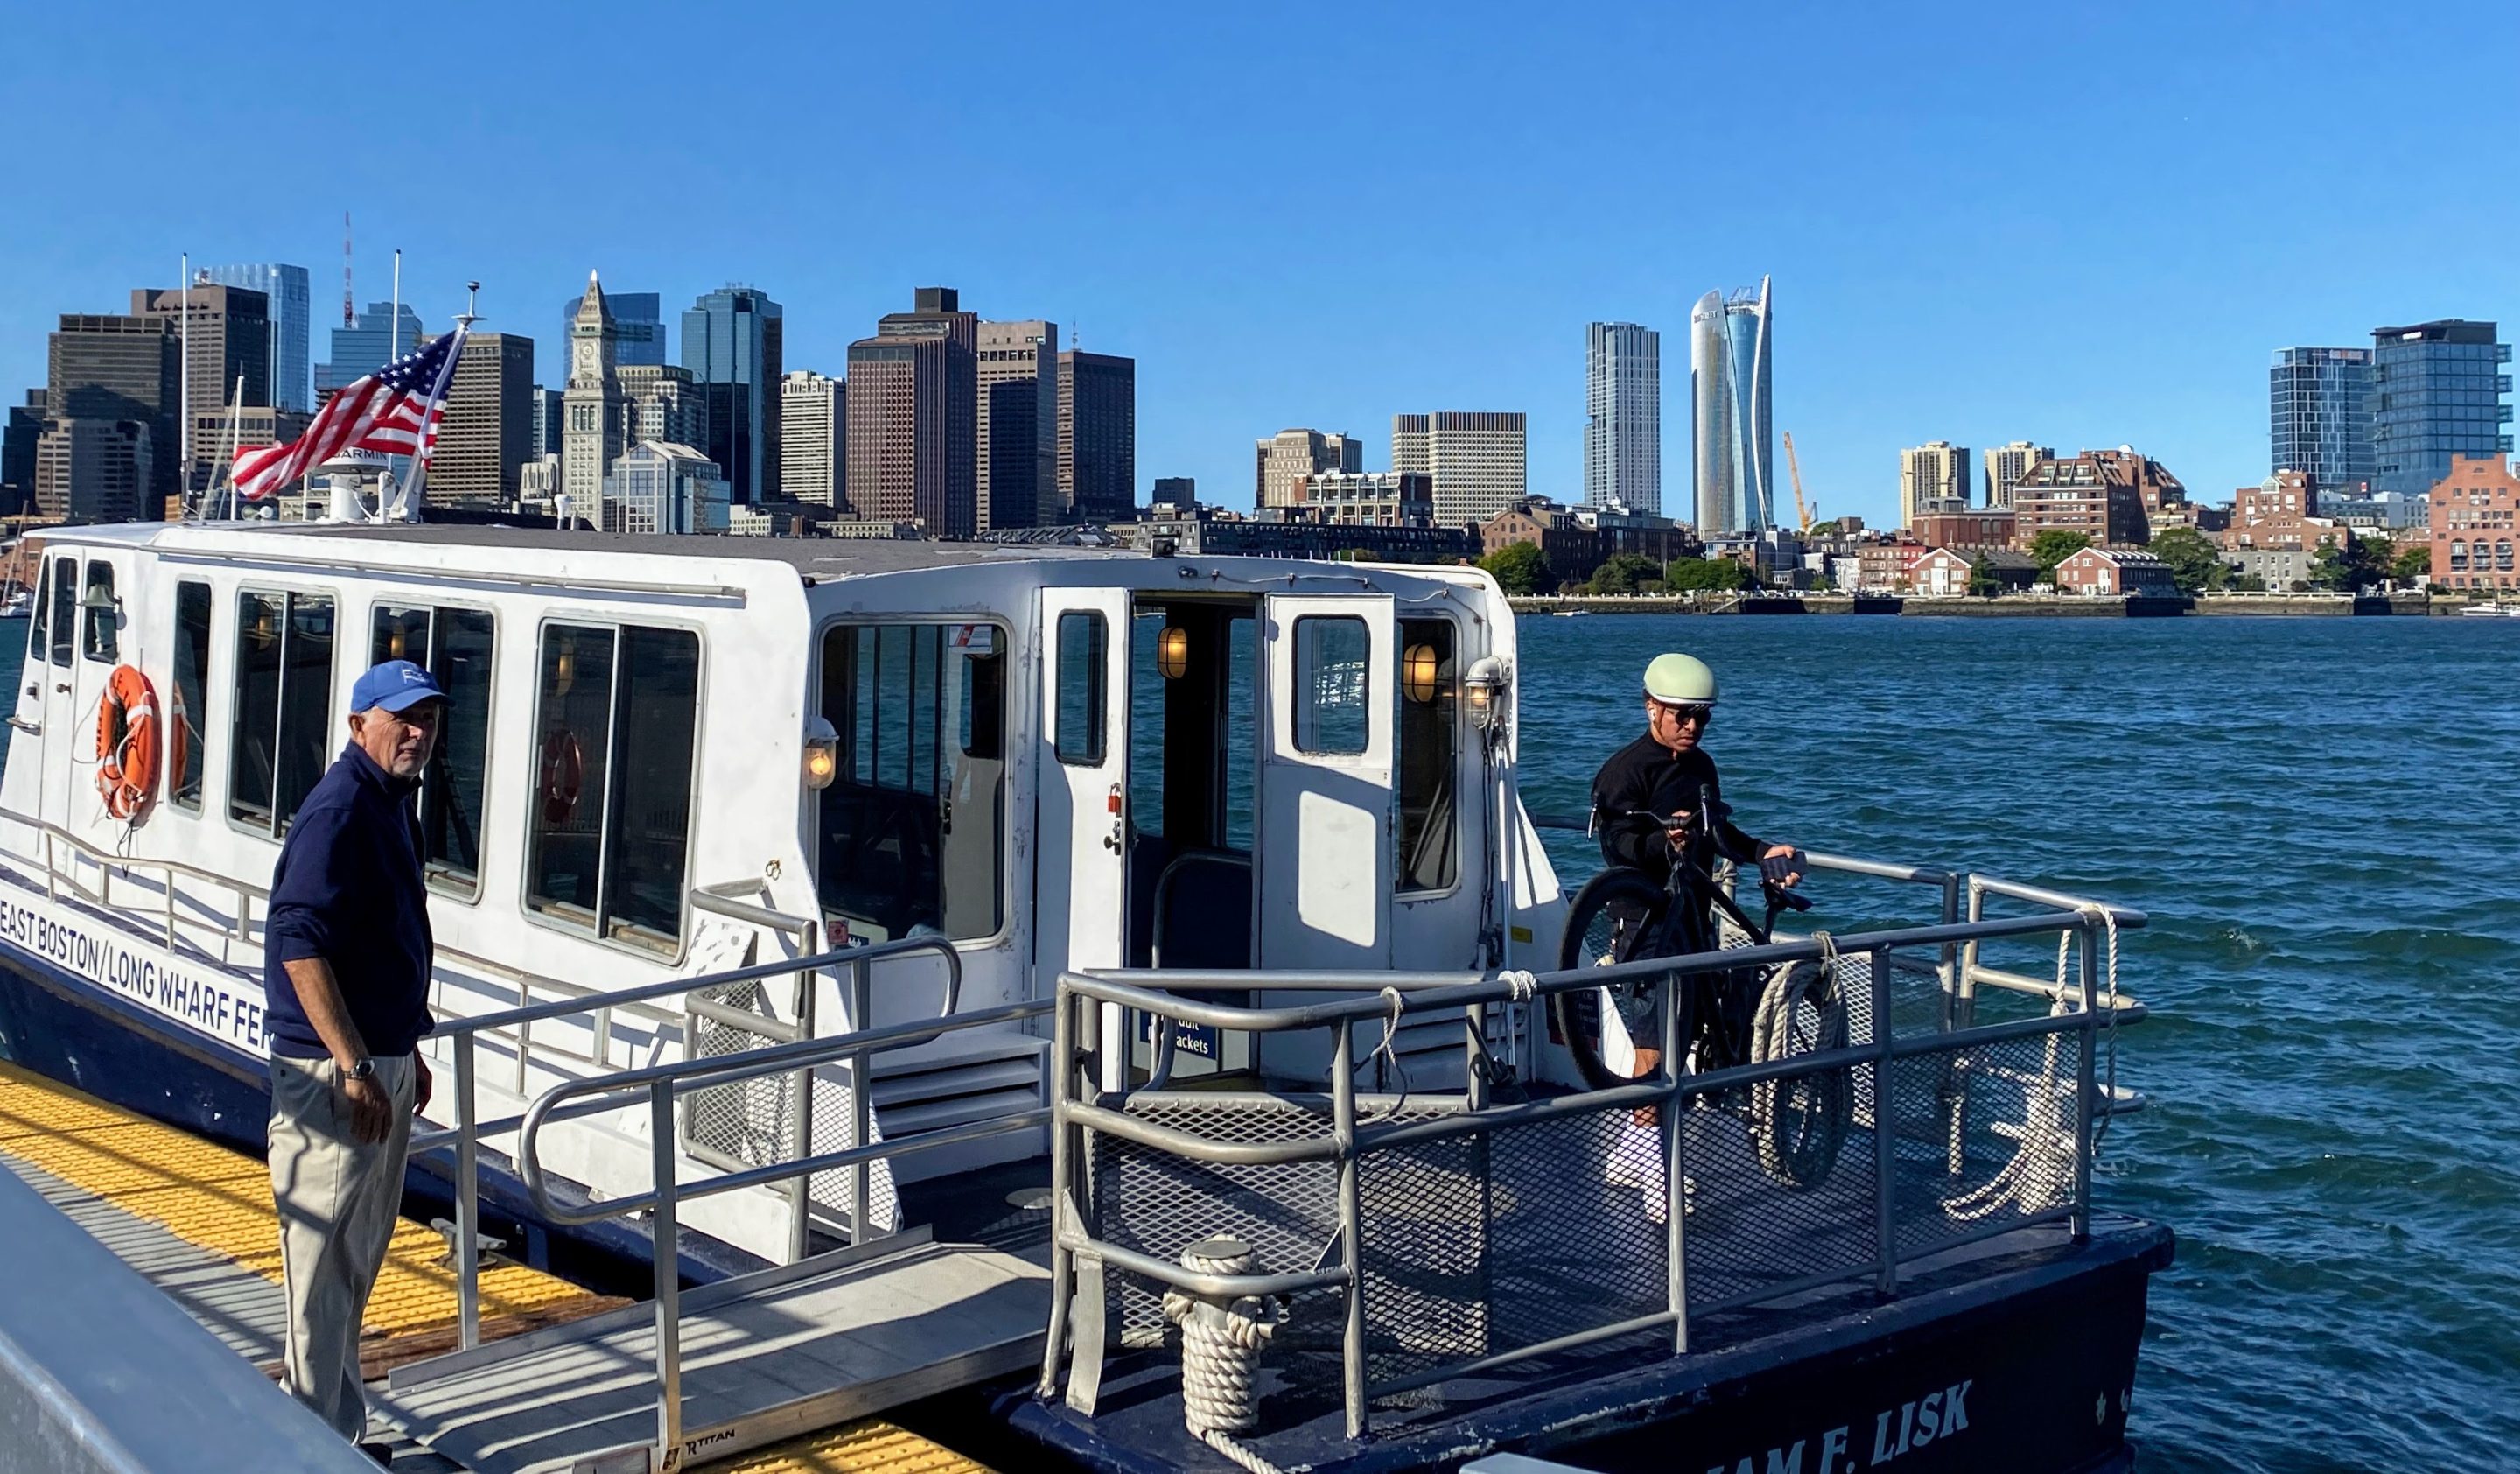 A ferry attendant waits for a bicyclist to wheel his bike onboard at Lewis Wharf in East Boston. The downtown Boston skyline is visible in the background beyond Boston Harbor.